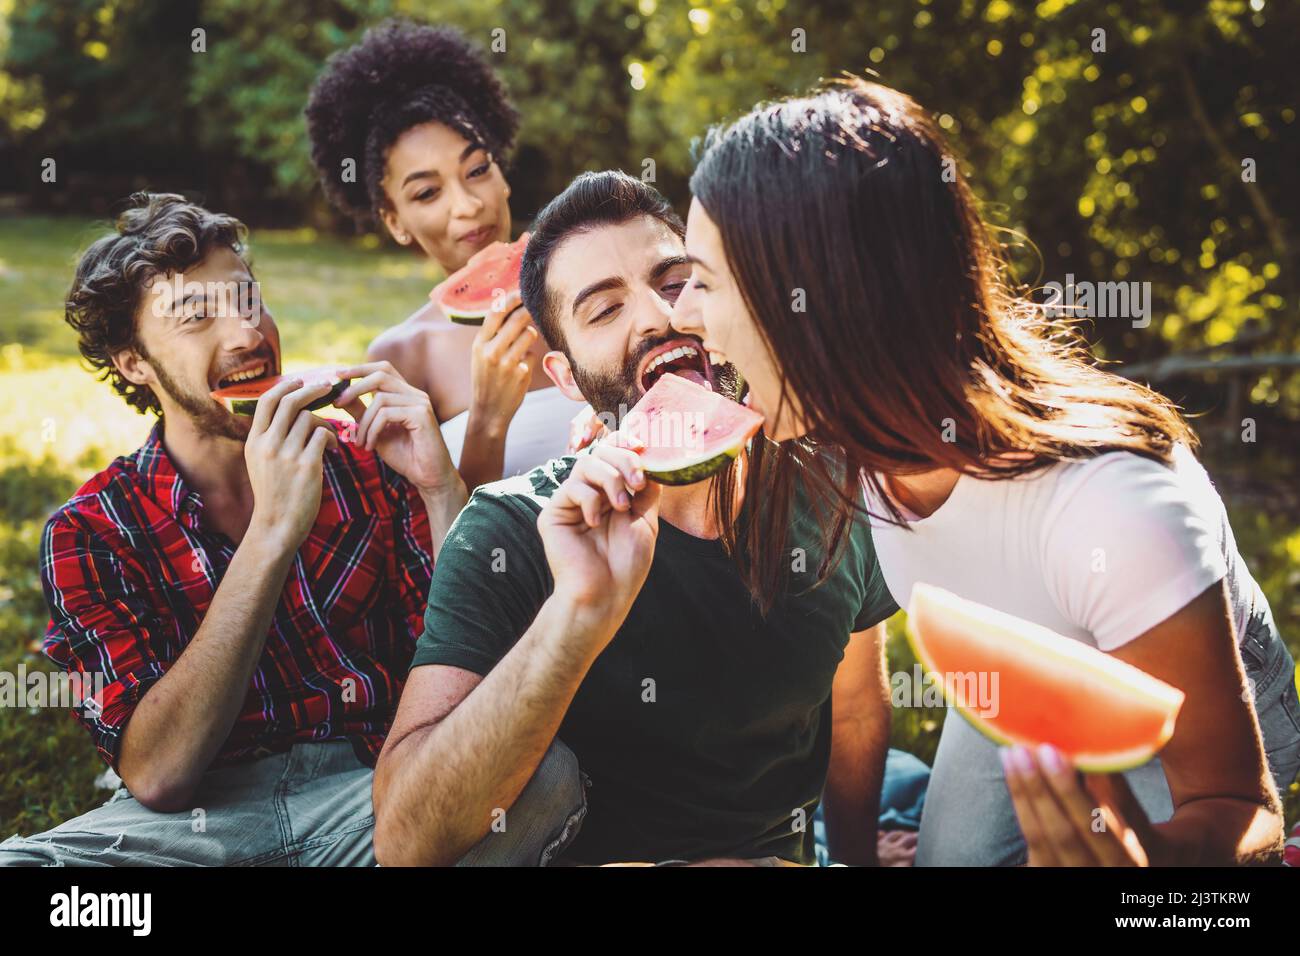 group of friends enjoying watermelon slices in the countryside having fun together on a weekend activity Stock Photo